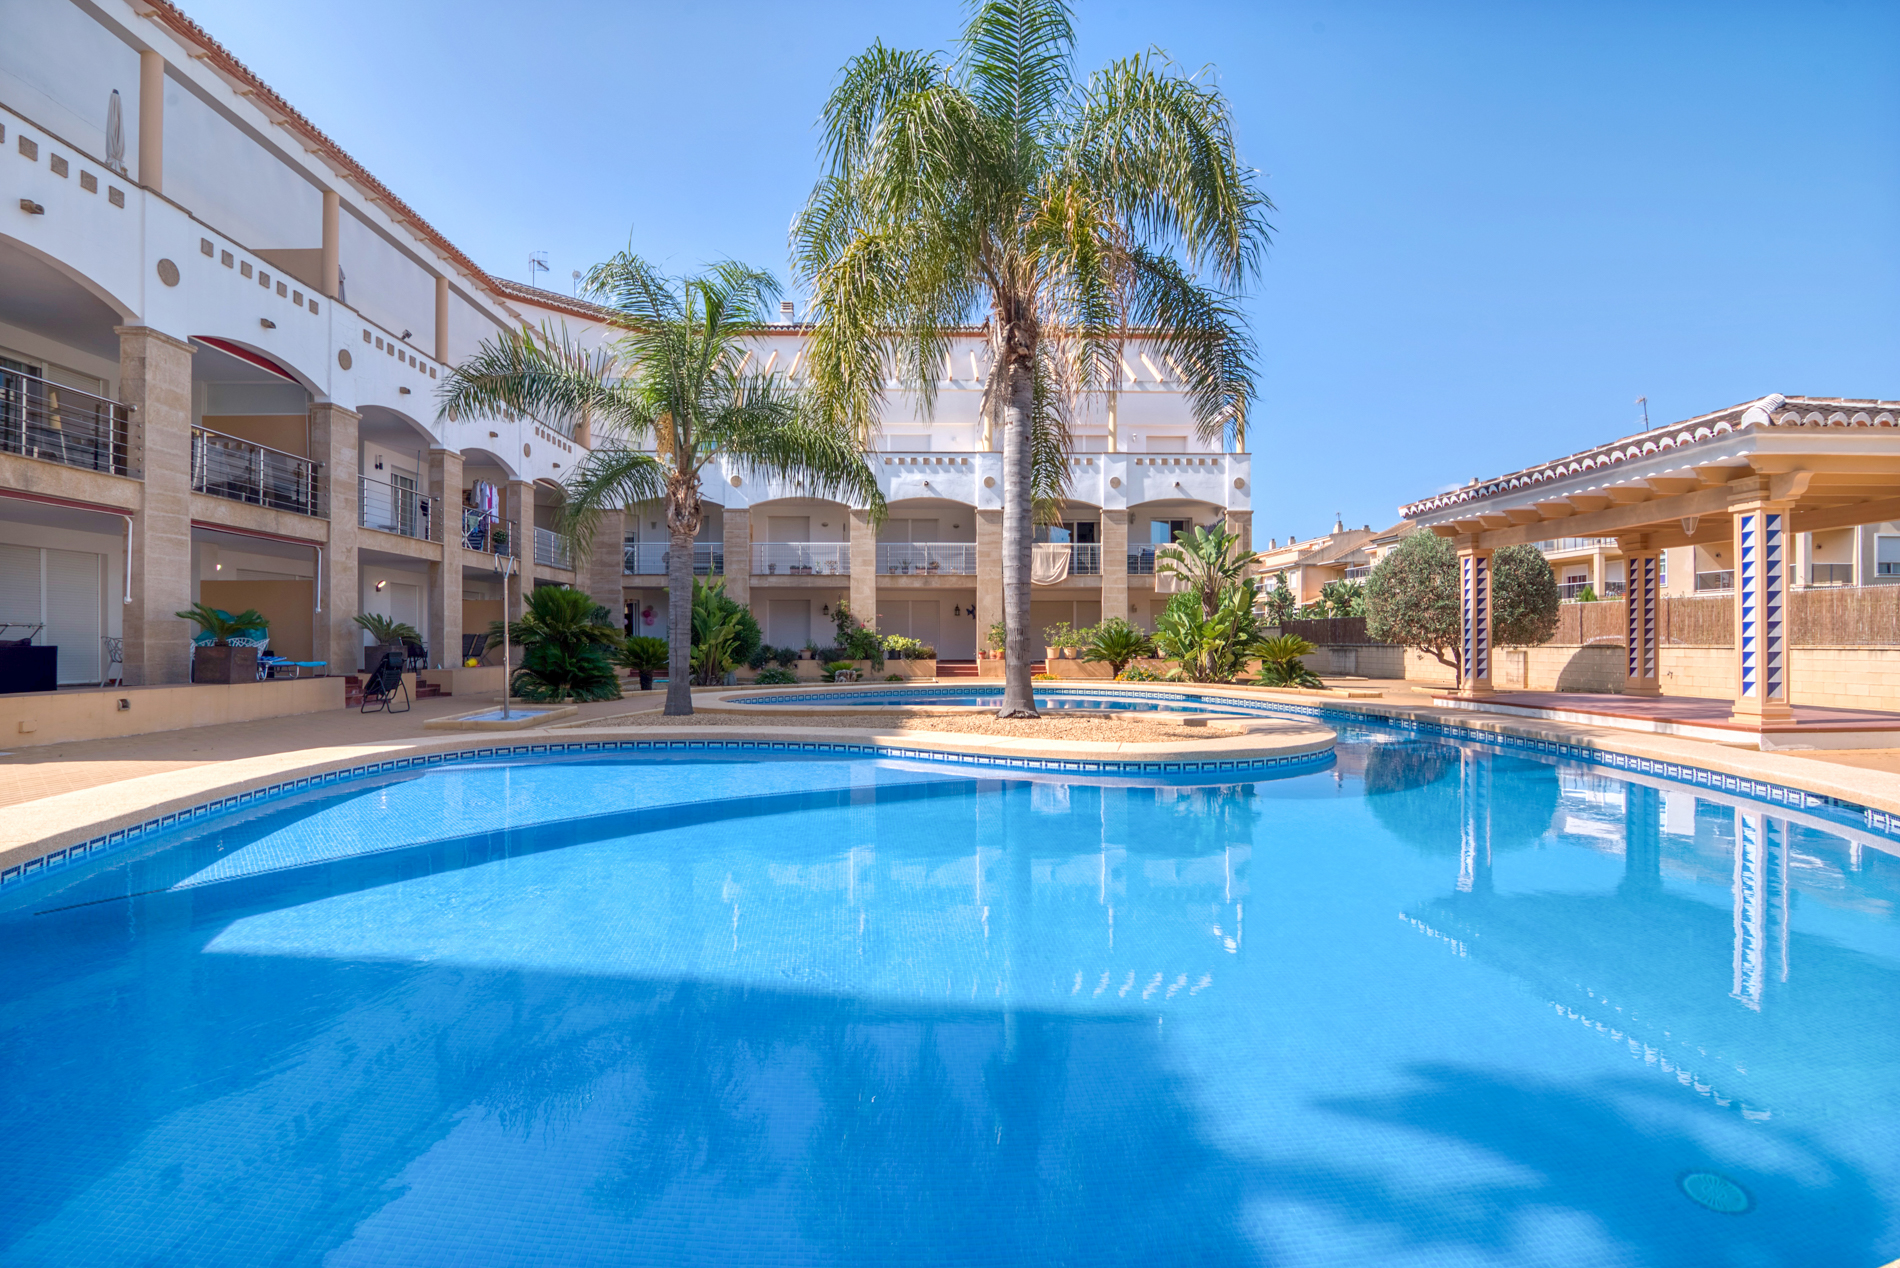 3 Bedroom Penthouse for Sale in Javea near Arenal Beach